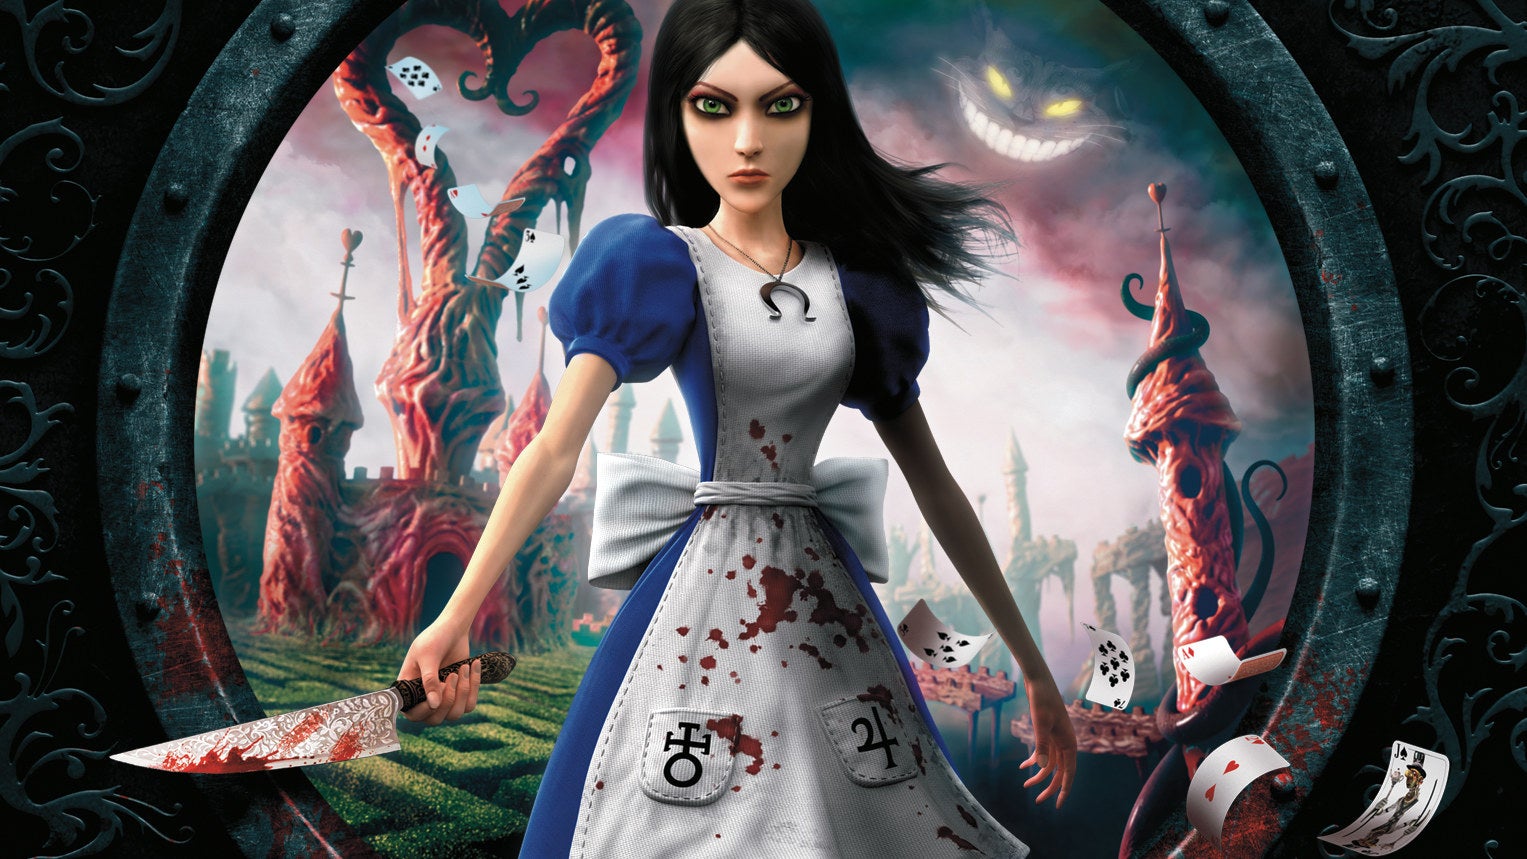 American McGee is still trying to make Alice: Asylum a reality